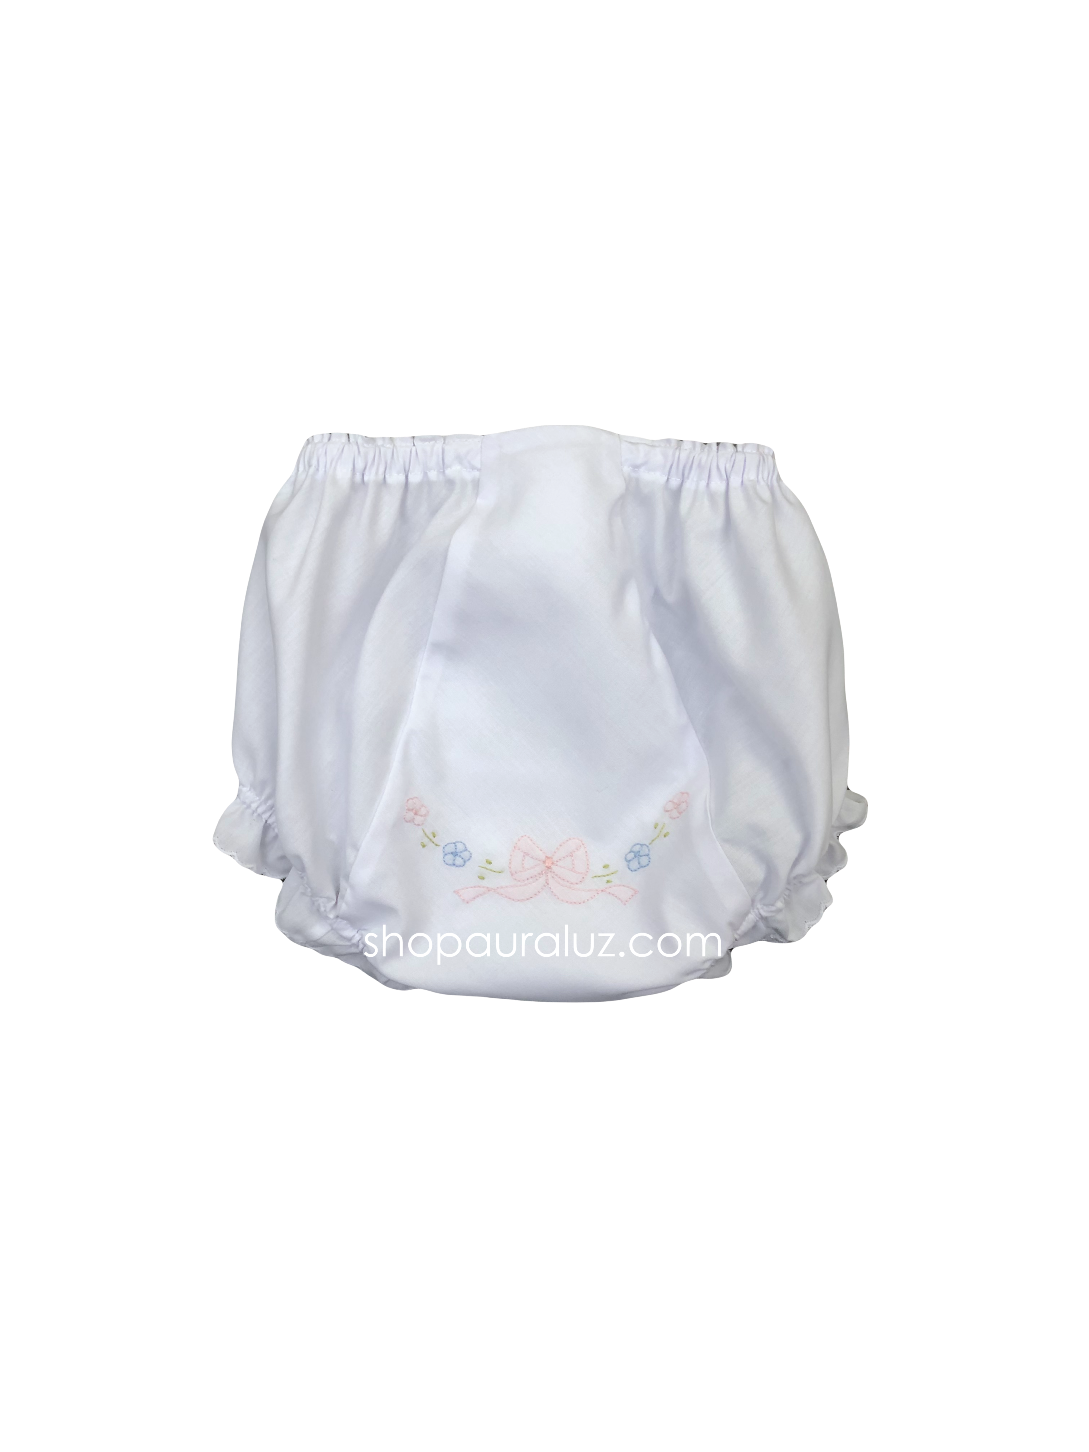 Auraluz Panty...White with scallops and embroidered tiny bow